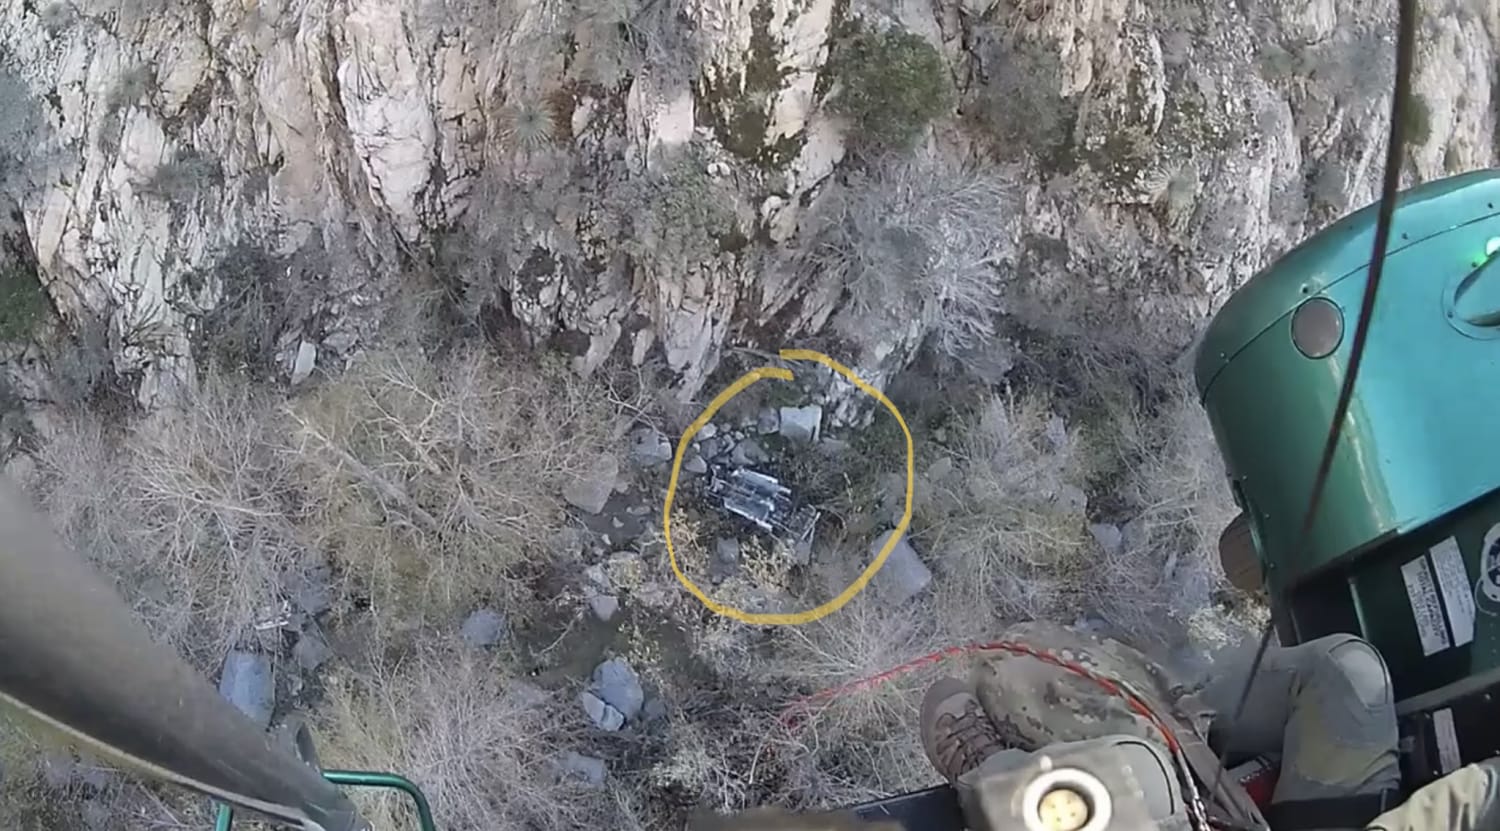 Video shows dramatic helicopter rescue  after vehicle plunged into California canyon